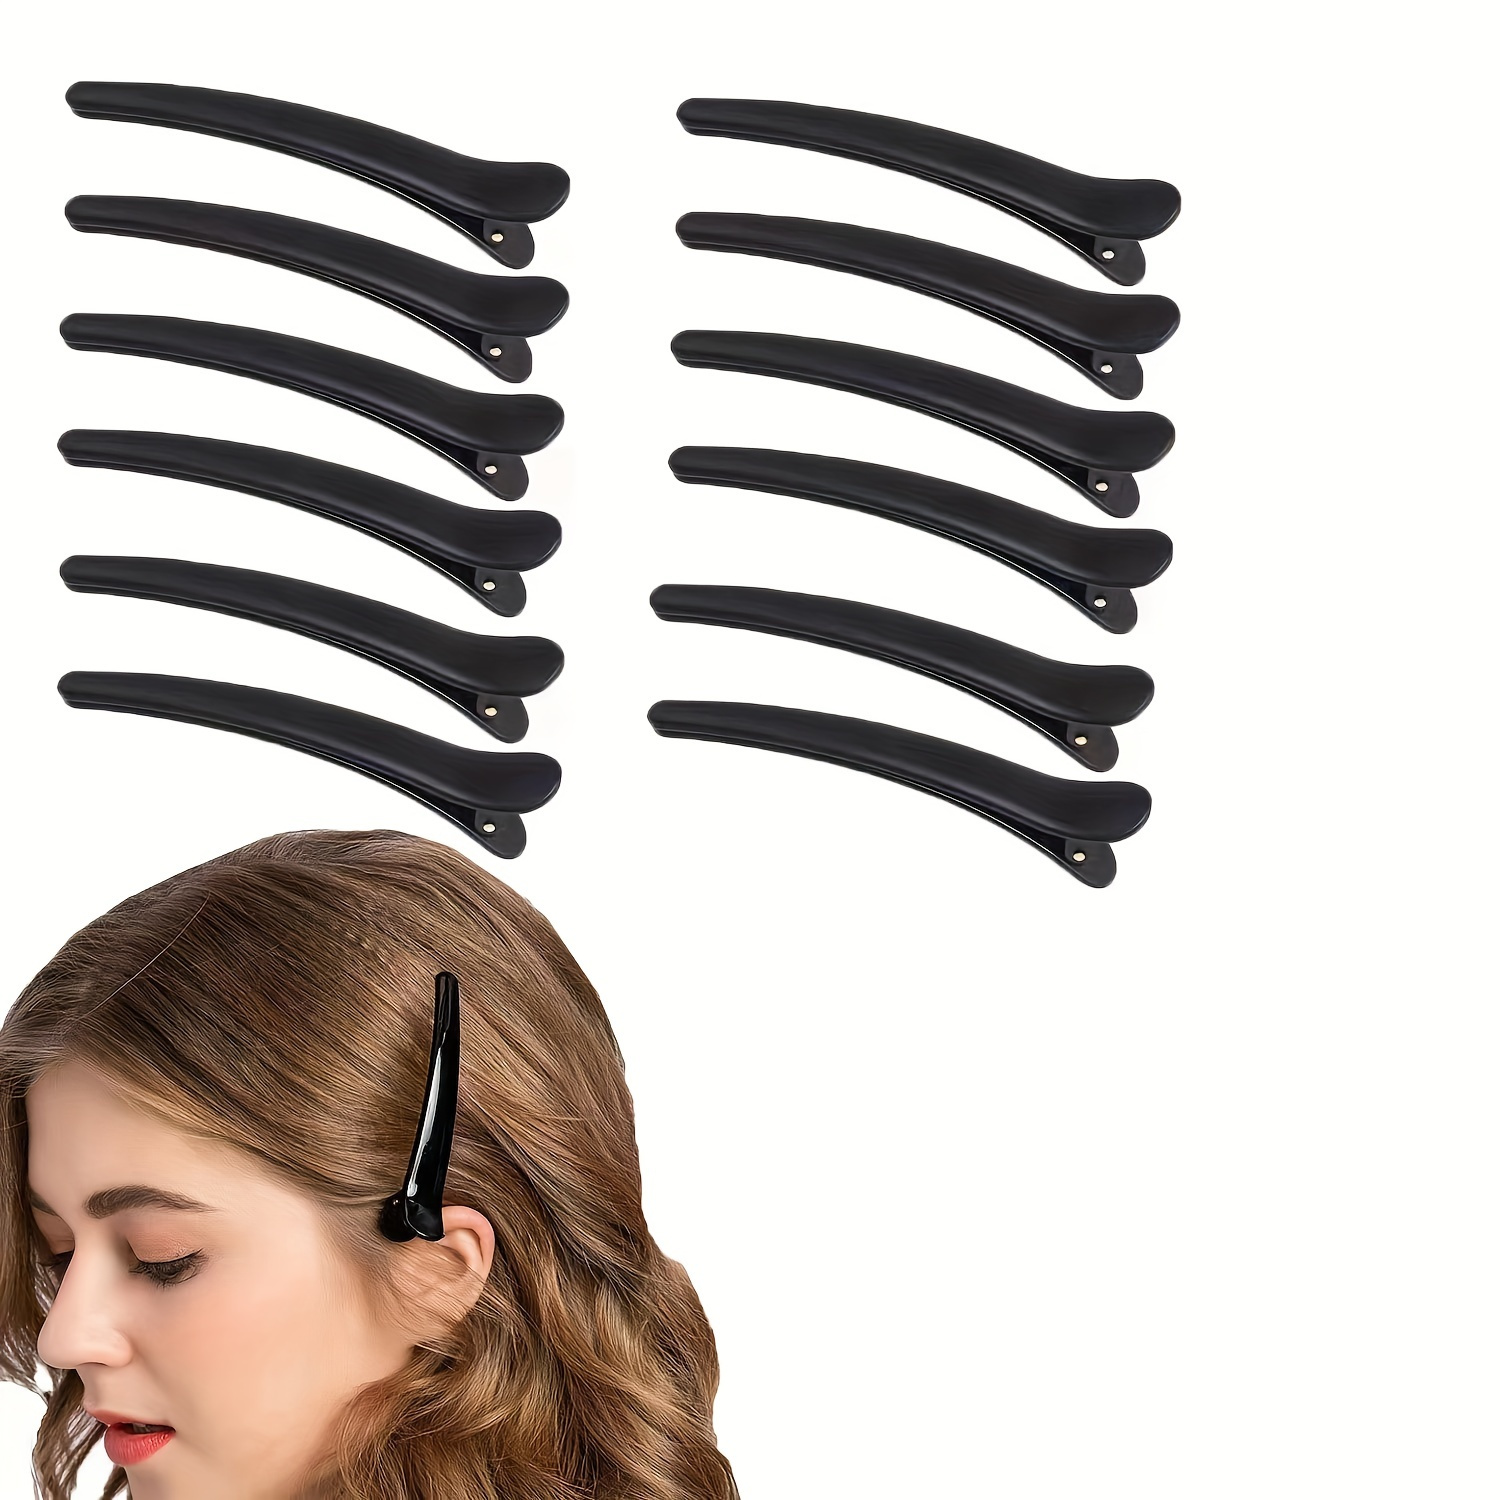 

12pcs Solid Color Hair Duckbill Clips Hair Side Clips Bangs Clips Trendy Hair Styling Accessories For Women And Daily Use Wear